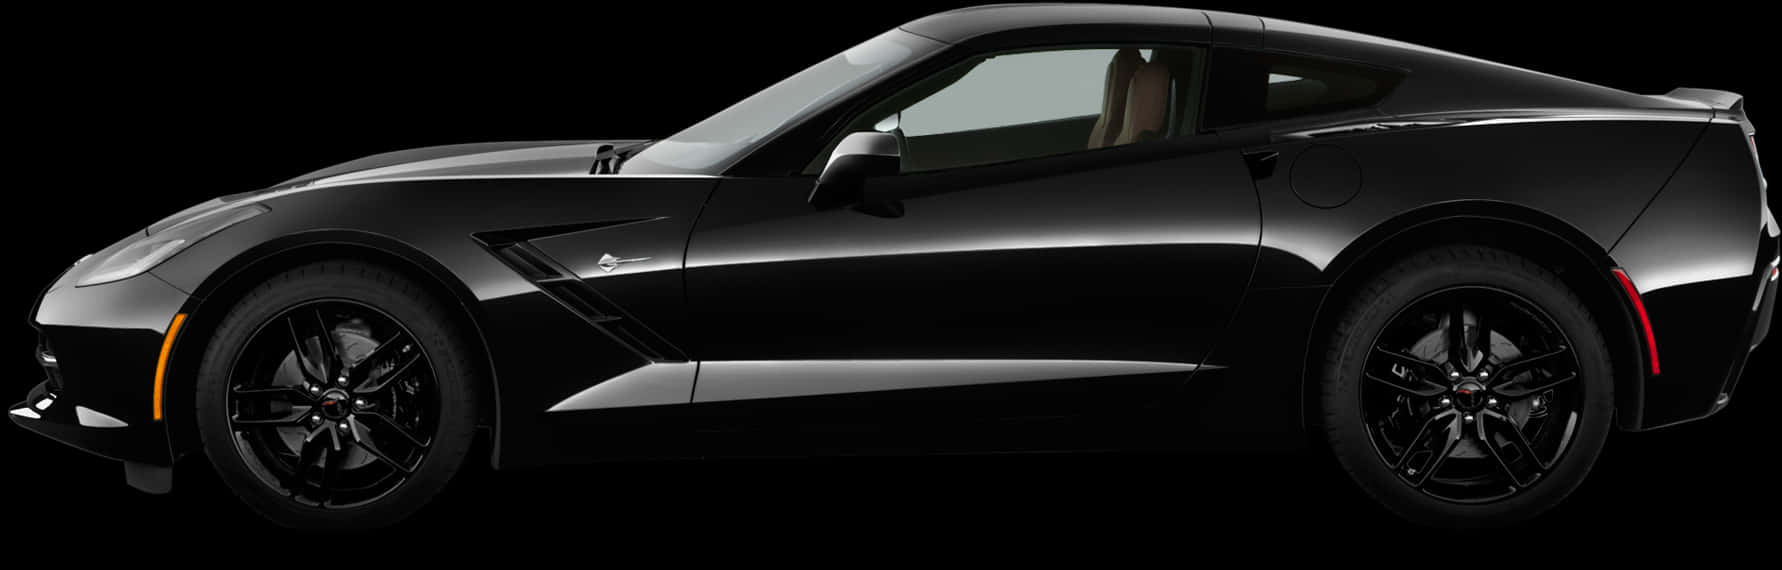 Black Sports Car Side View PNG image